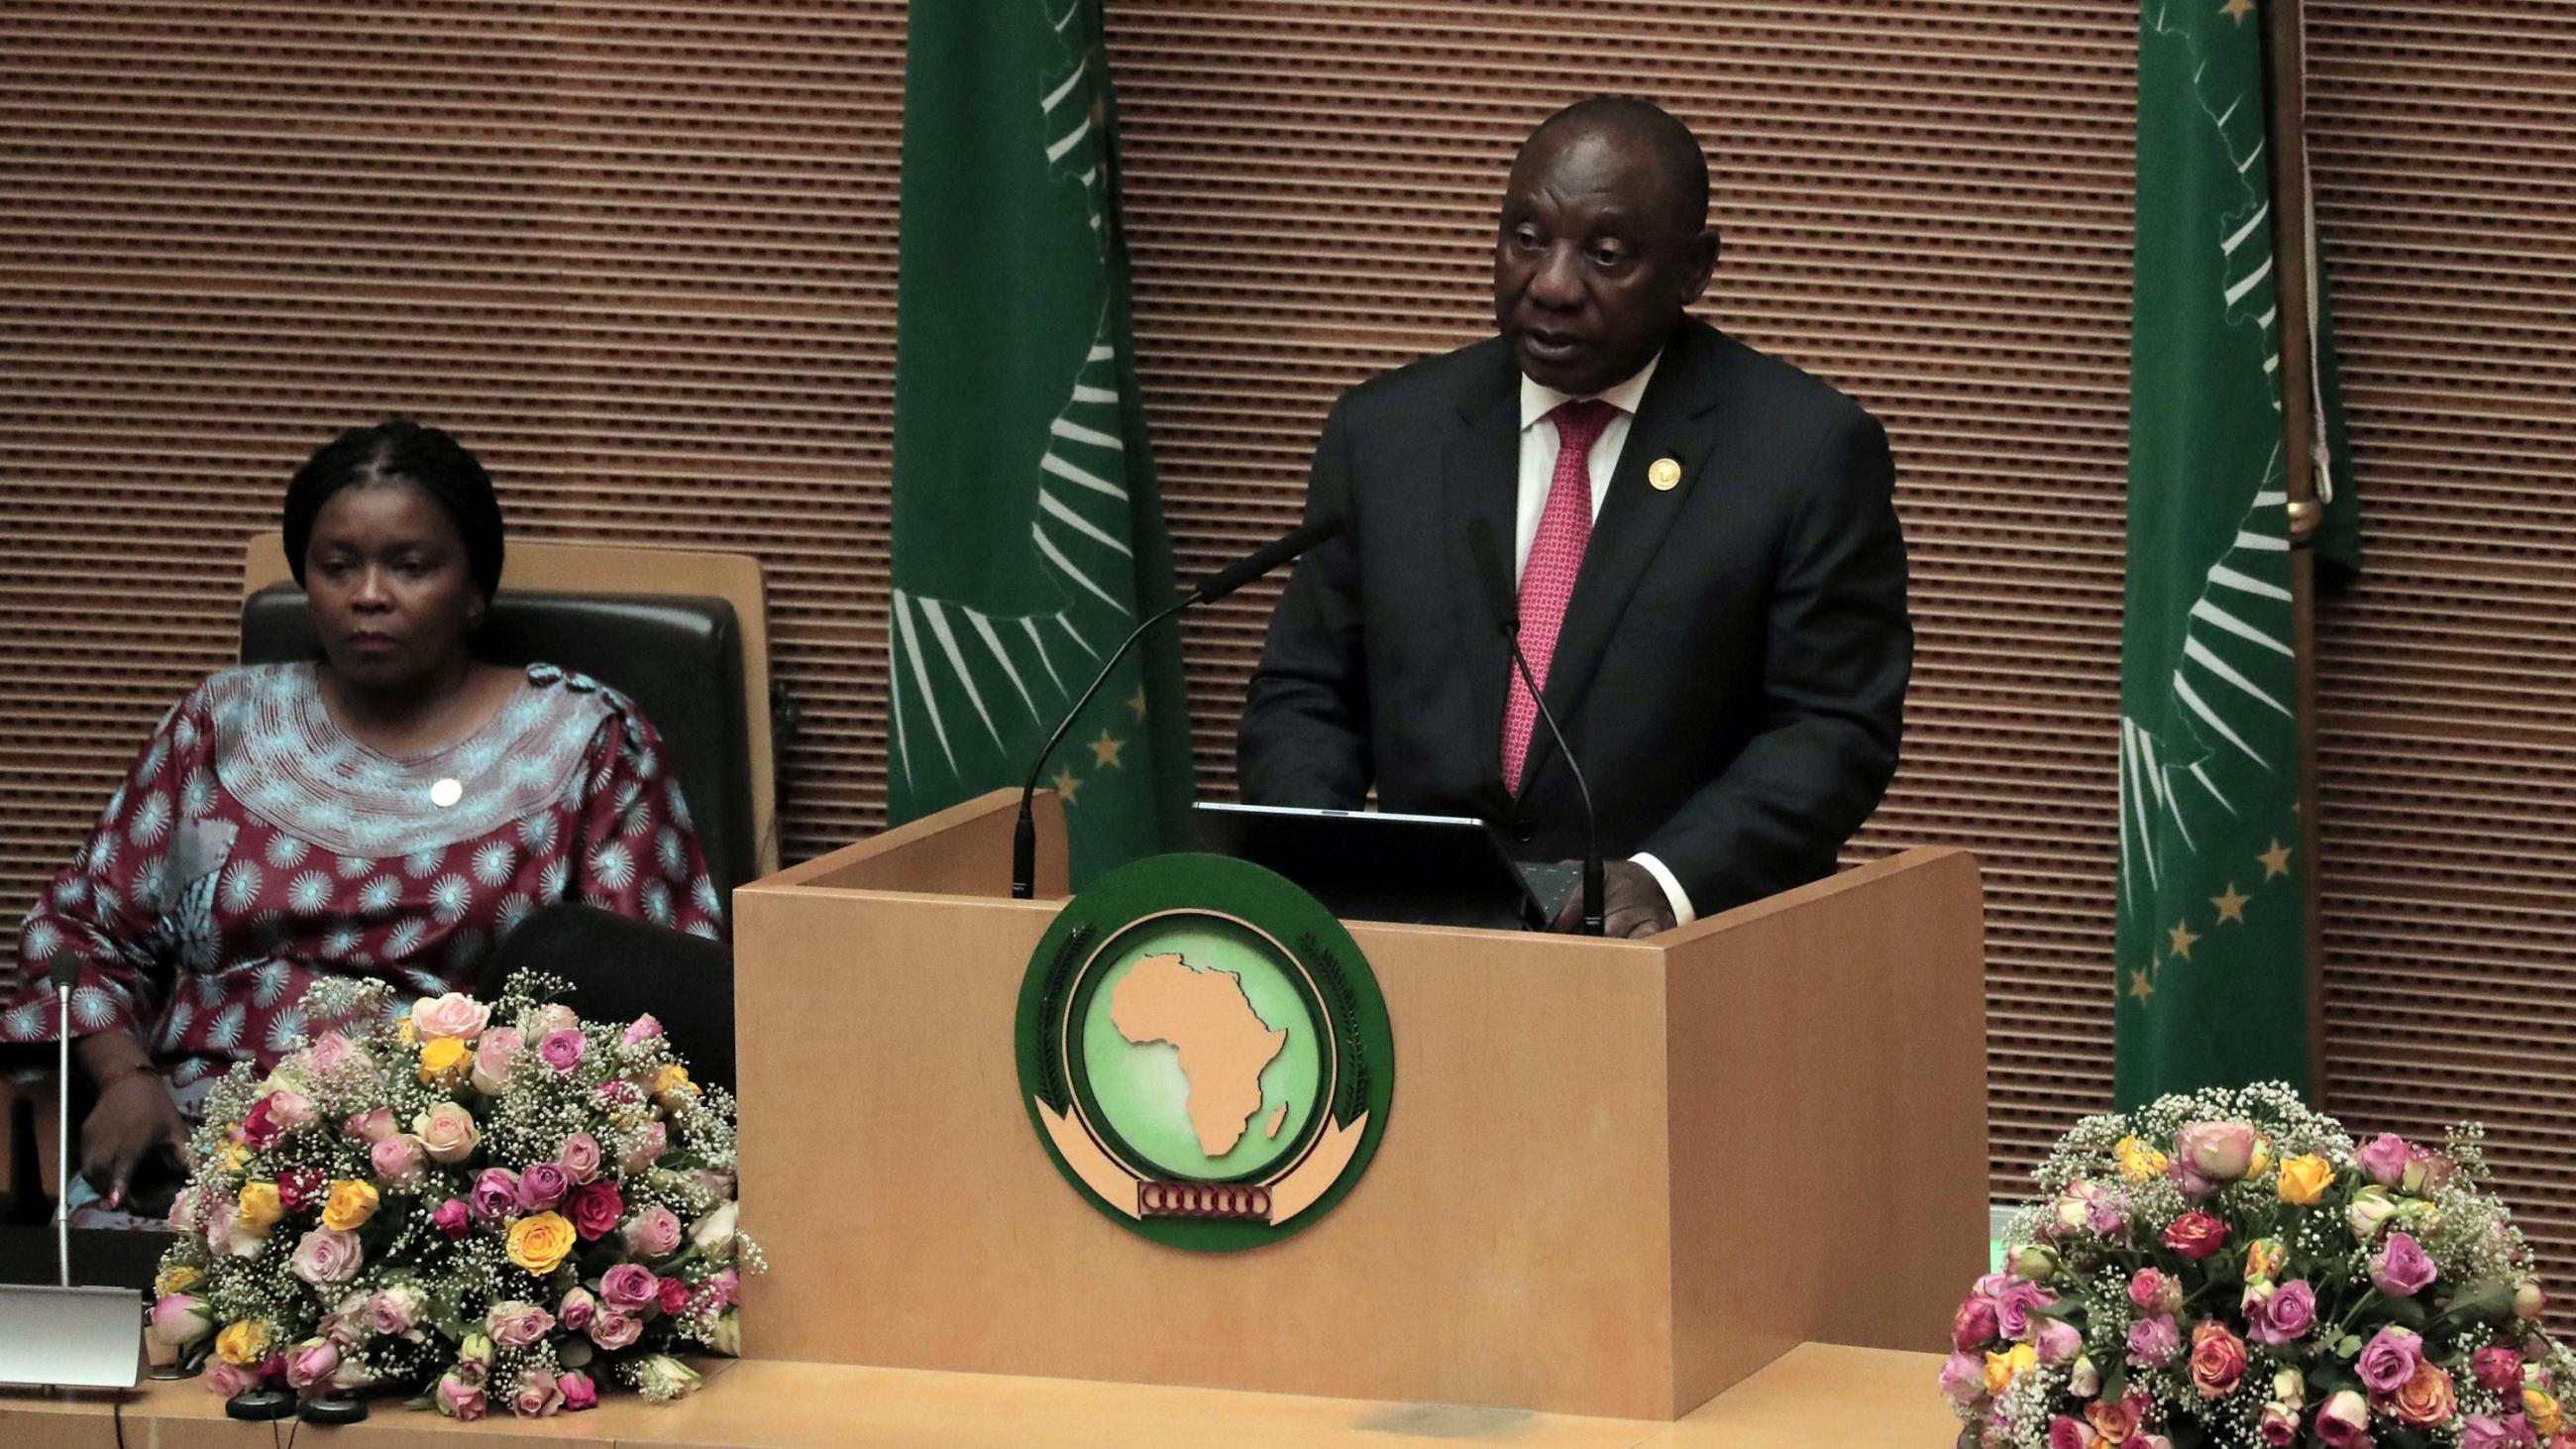 The photo shows the South African president at a podium speaking into a microphone. 